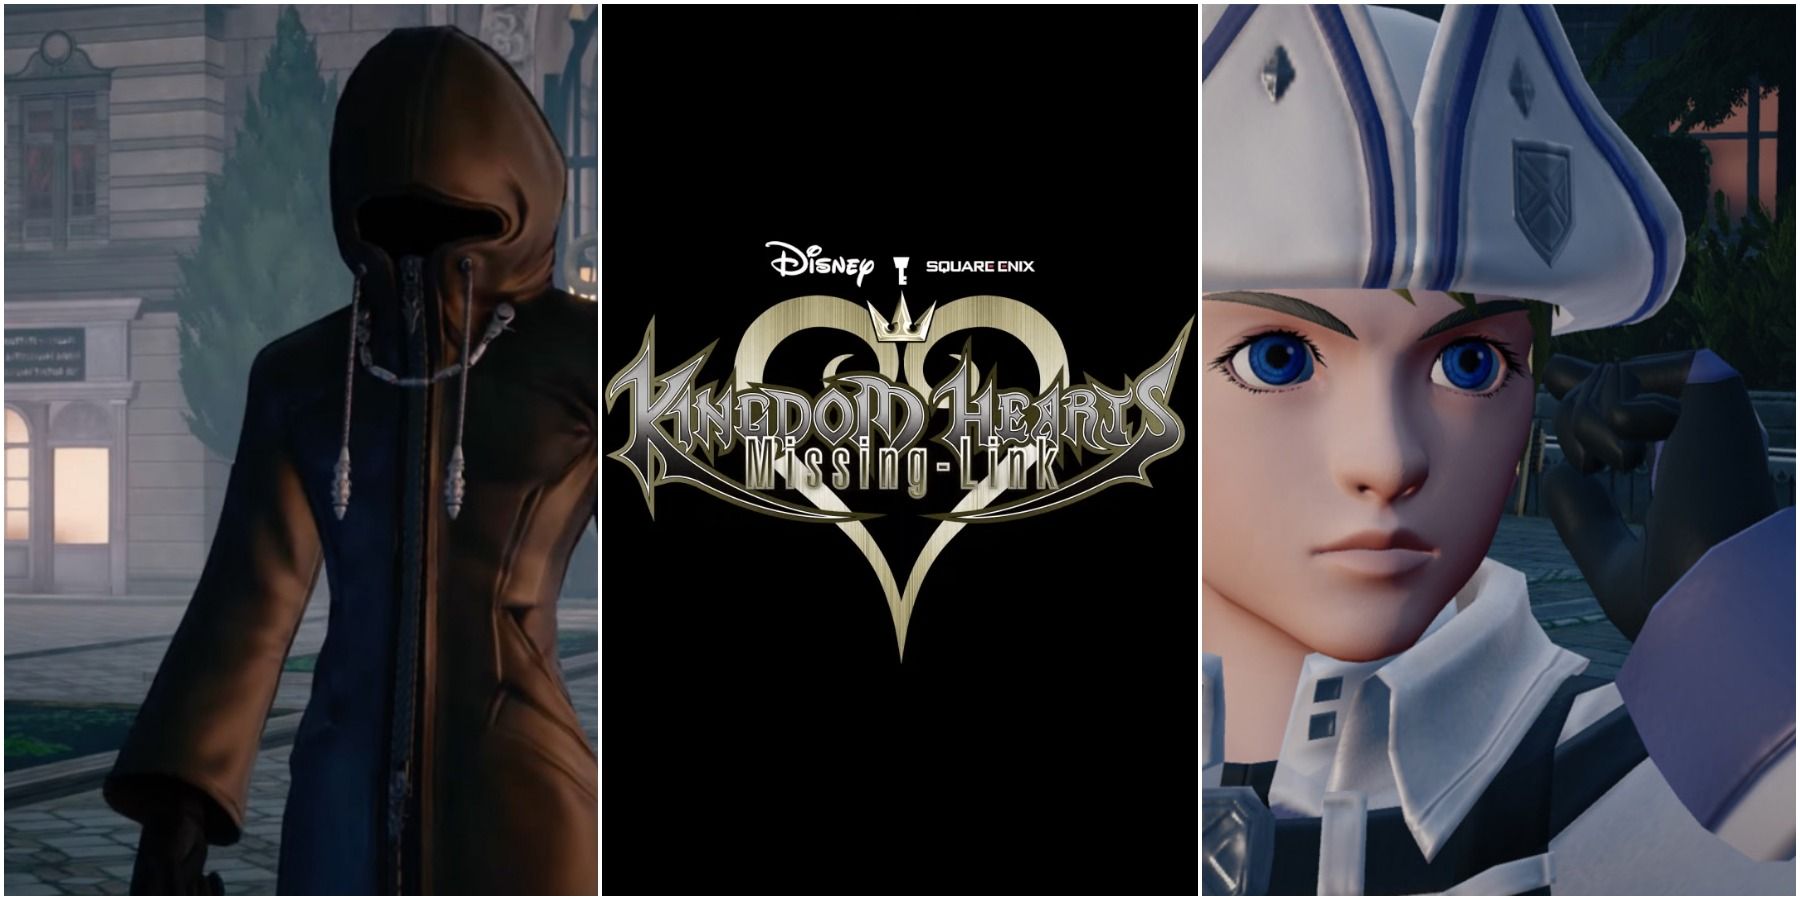 Kingdom Hearts Missing Link - EVEN MORE INFO! Keyblades, Story & MORE! 